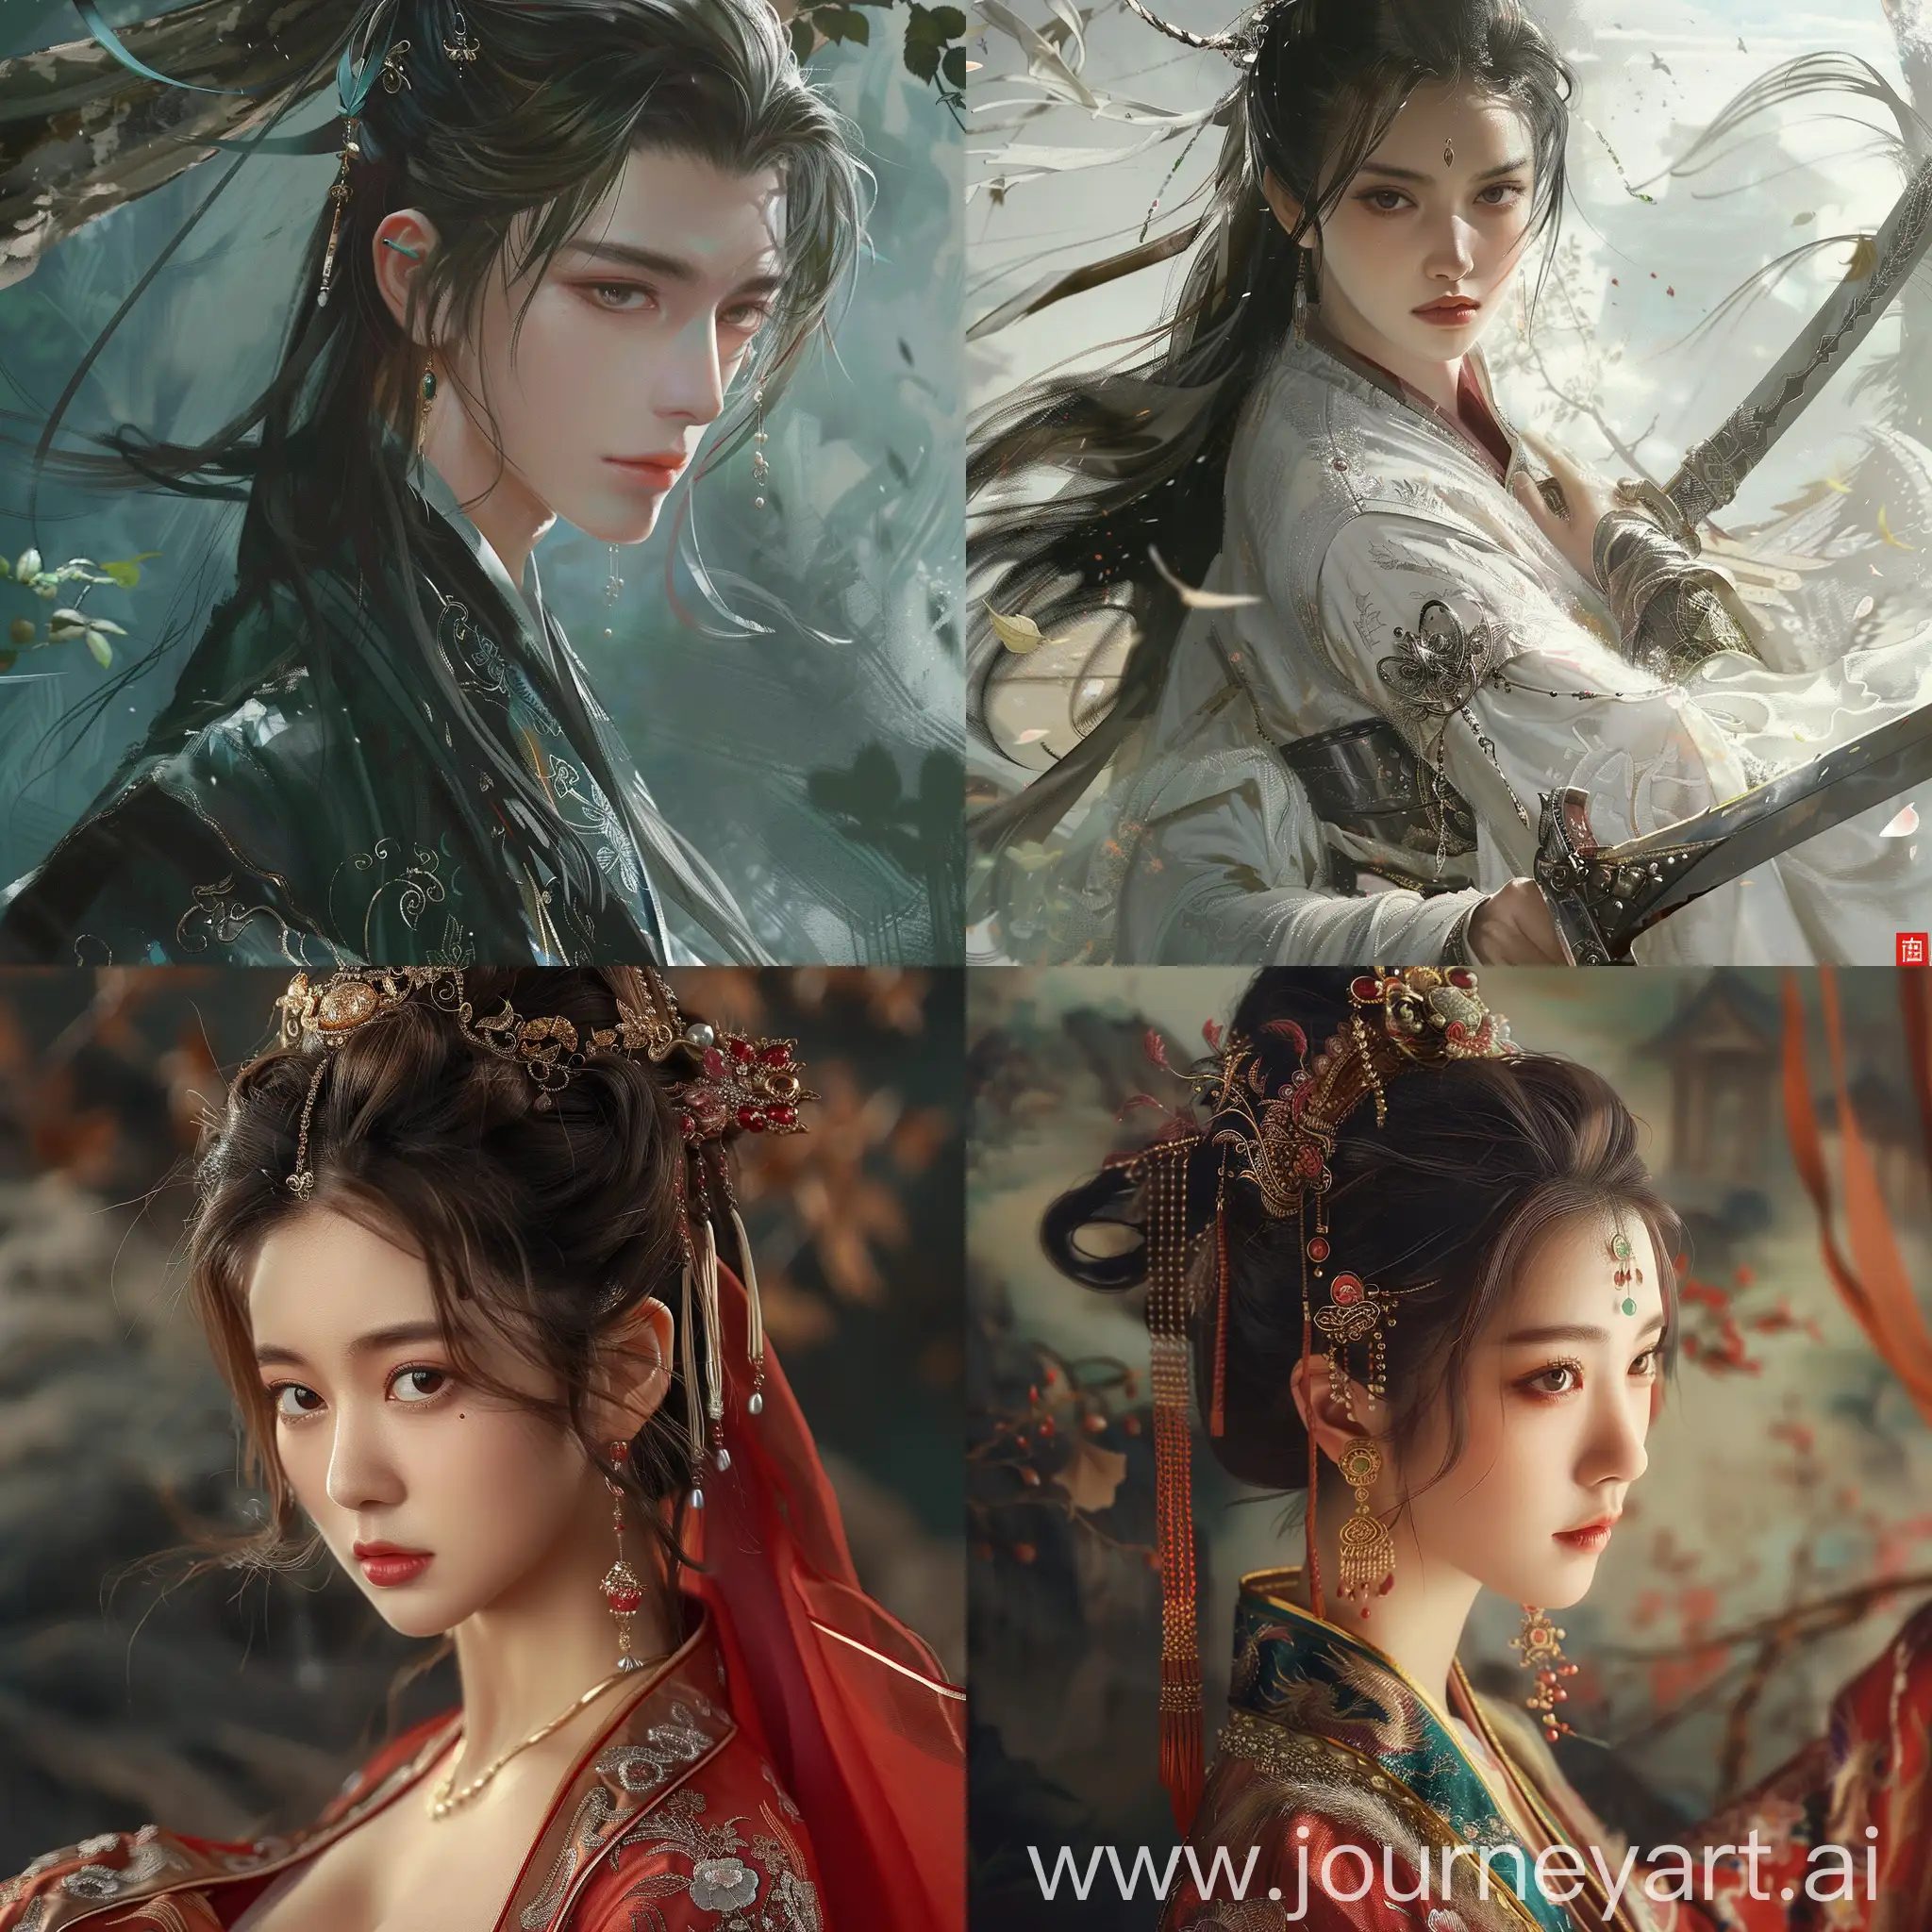 Fengshen-Bang-Mythological-Characters-in-Traditional-Style-Artwork